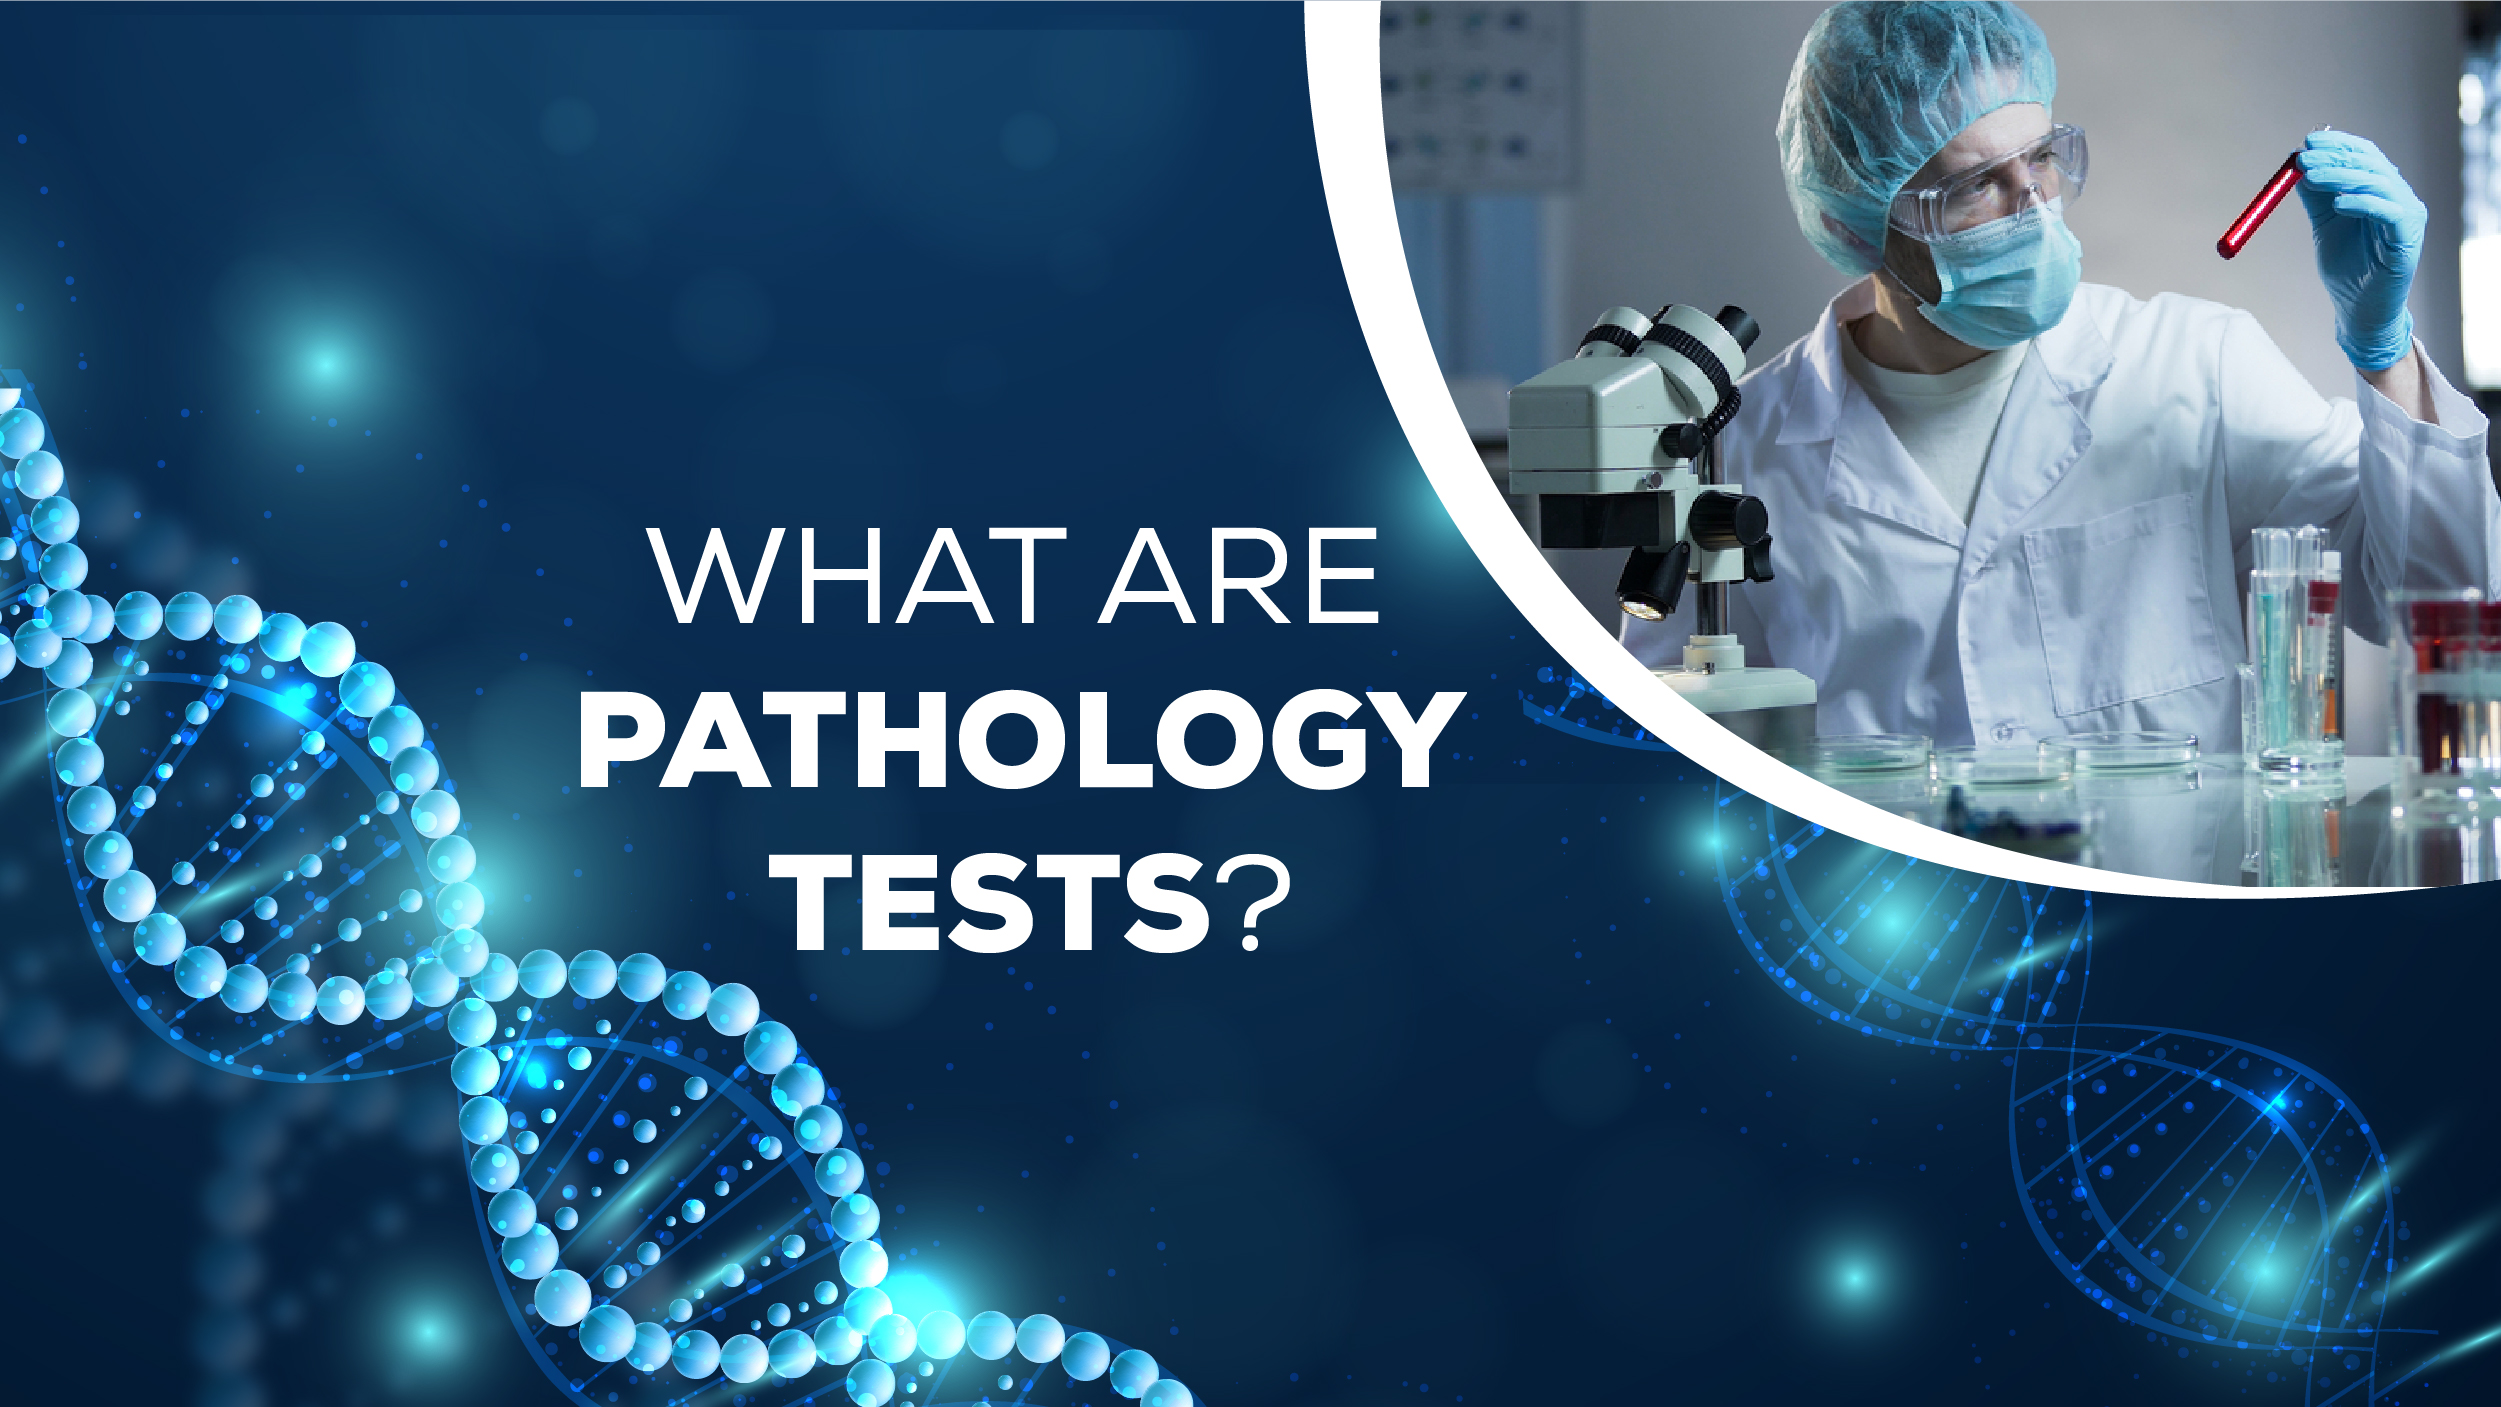 What are pathology tests?